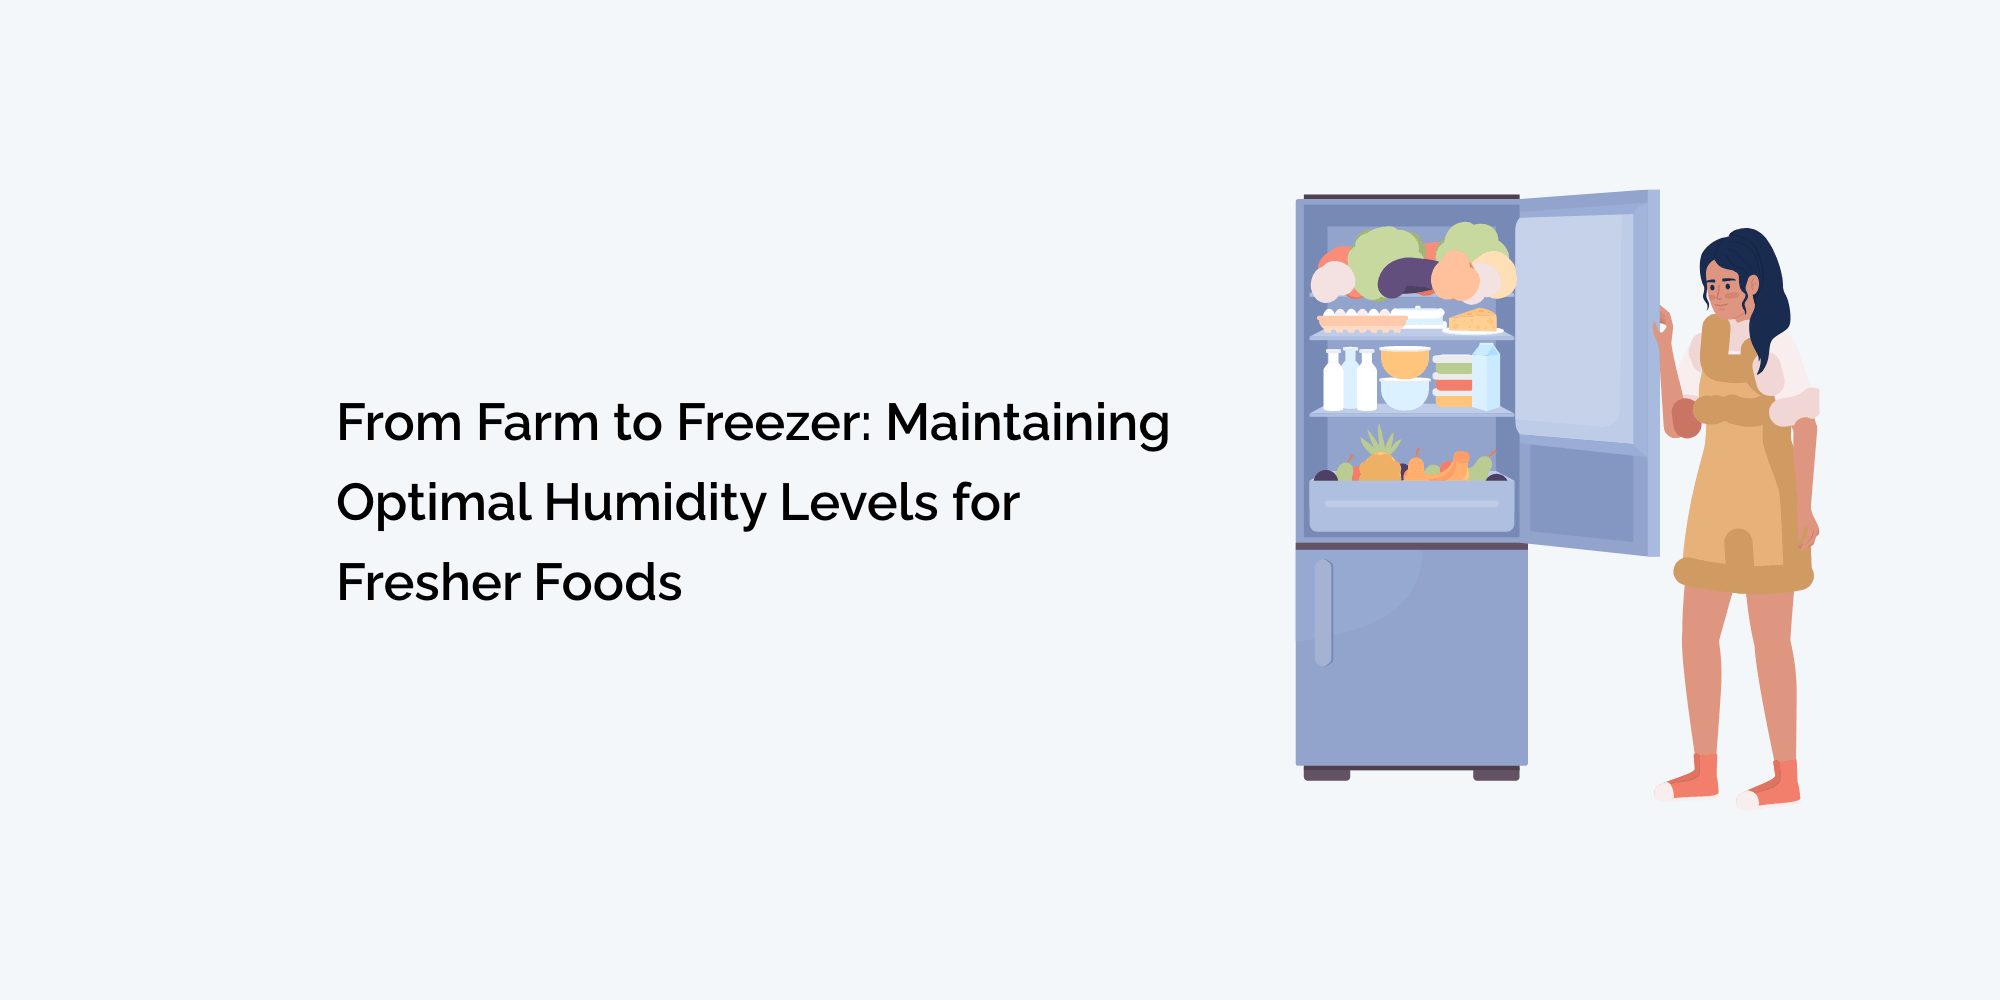 From Farm to Freezer: Maintaining Optimal Humidity Levels for Fresher Foods